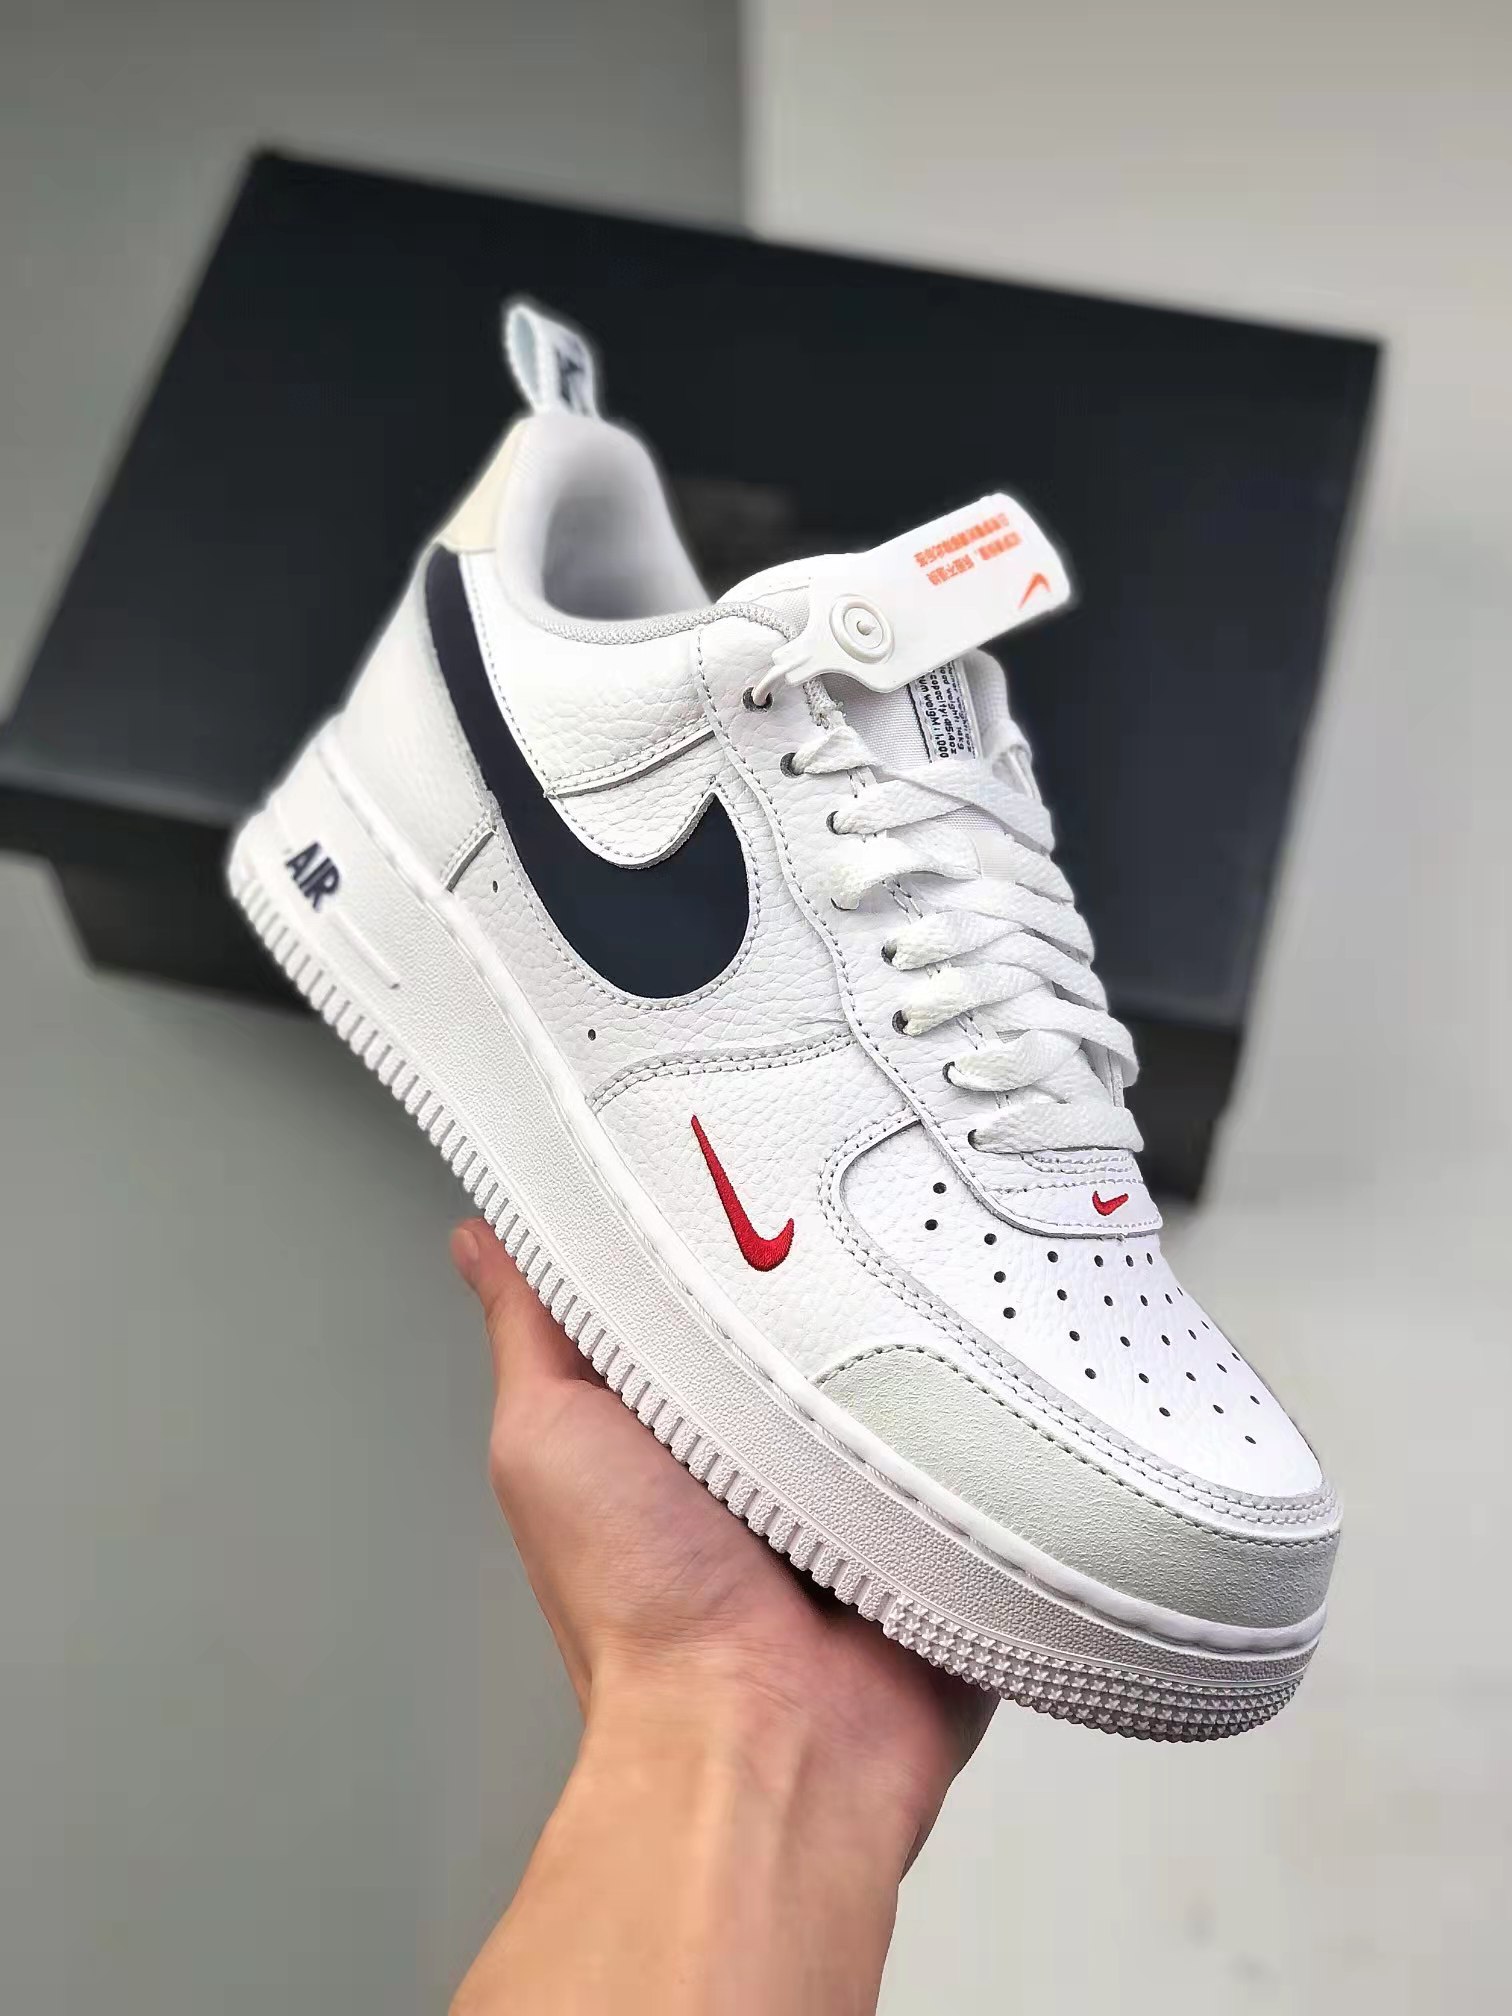 Nike Air Force 1 LV8 'Patriots' DJ6887-100 - Classic Style with a Patriotic Twist